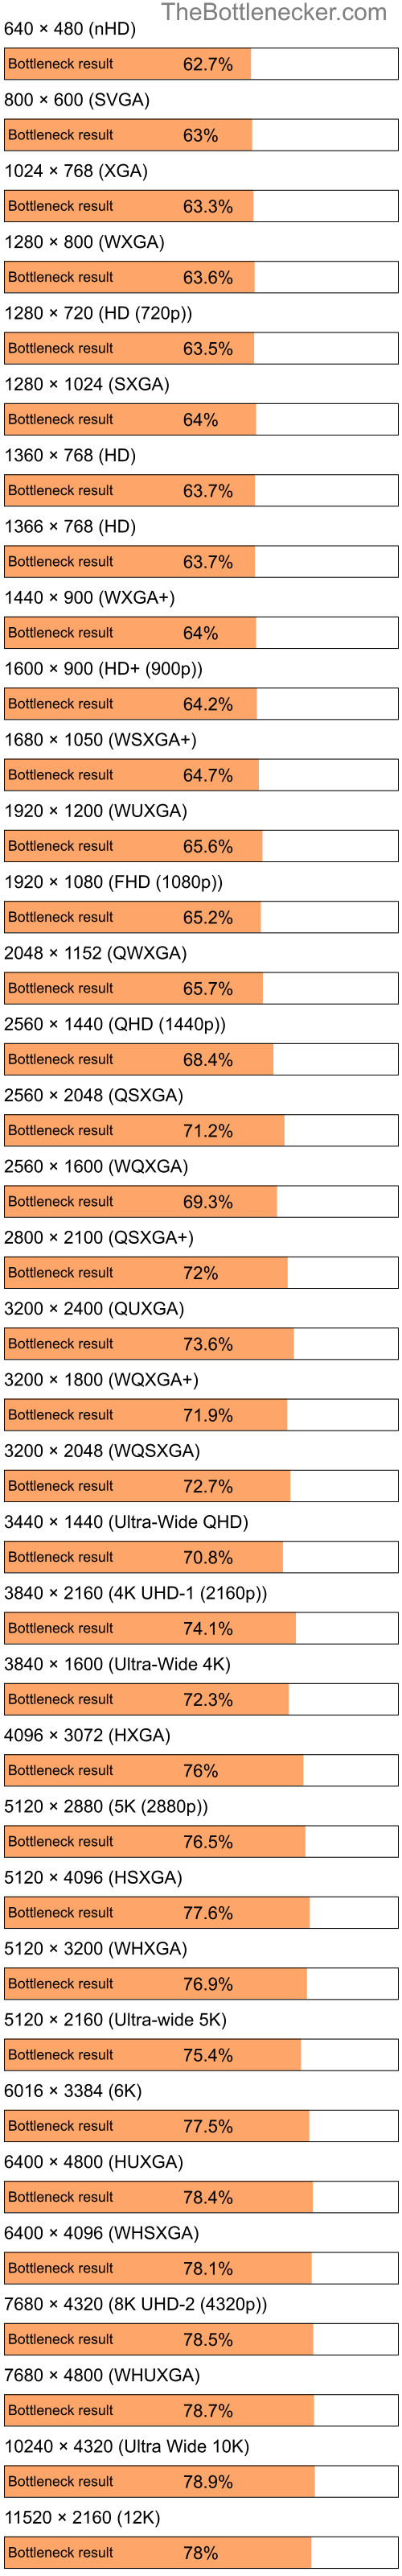 Bottleneck results by resolution for Intel Atom Z520 and AMD M880G with Mobility Radeon HD 4200 in General Tasks